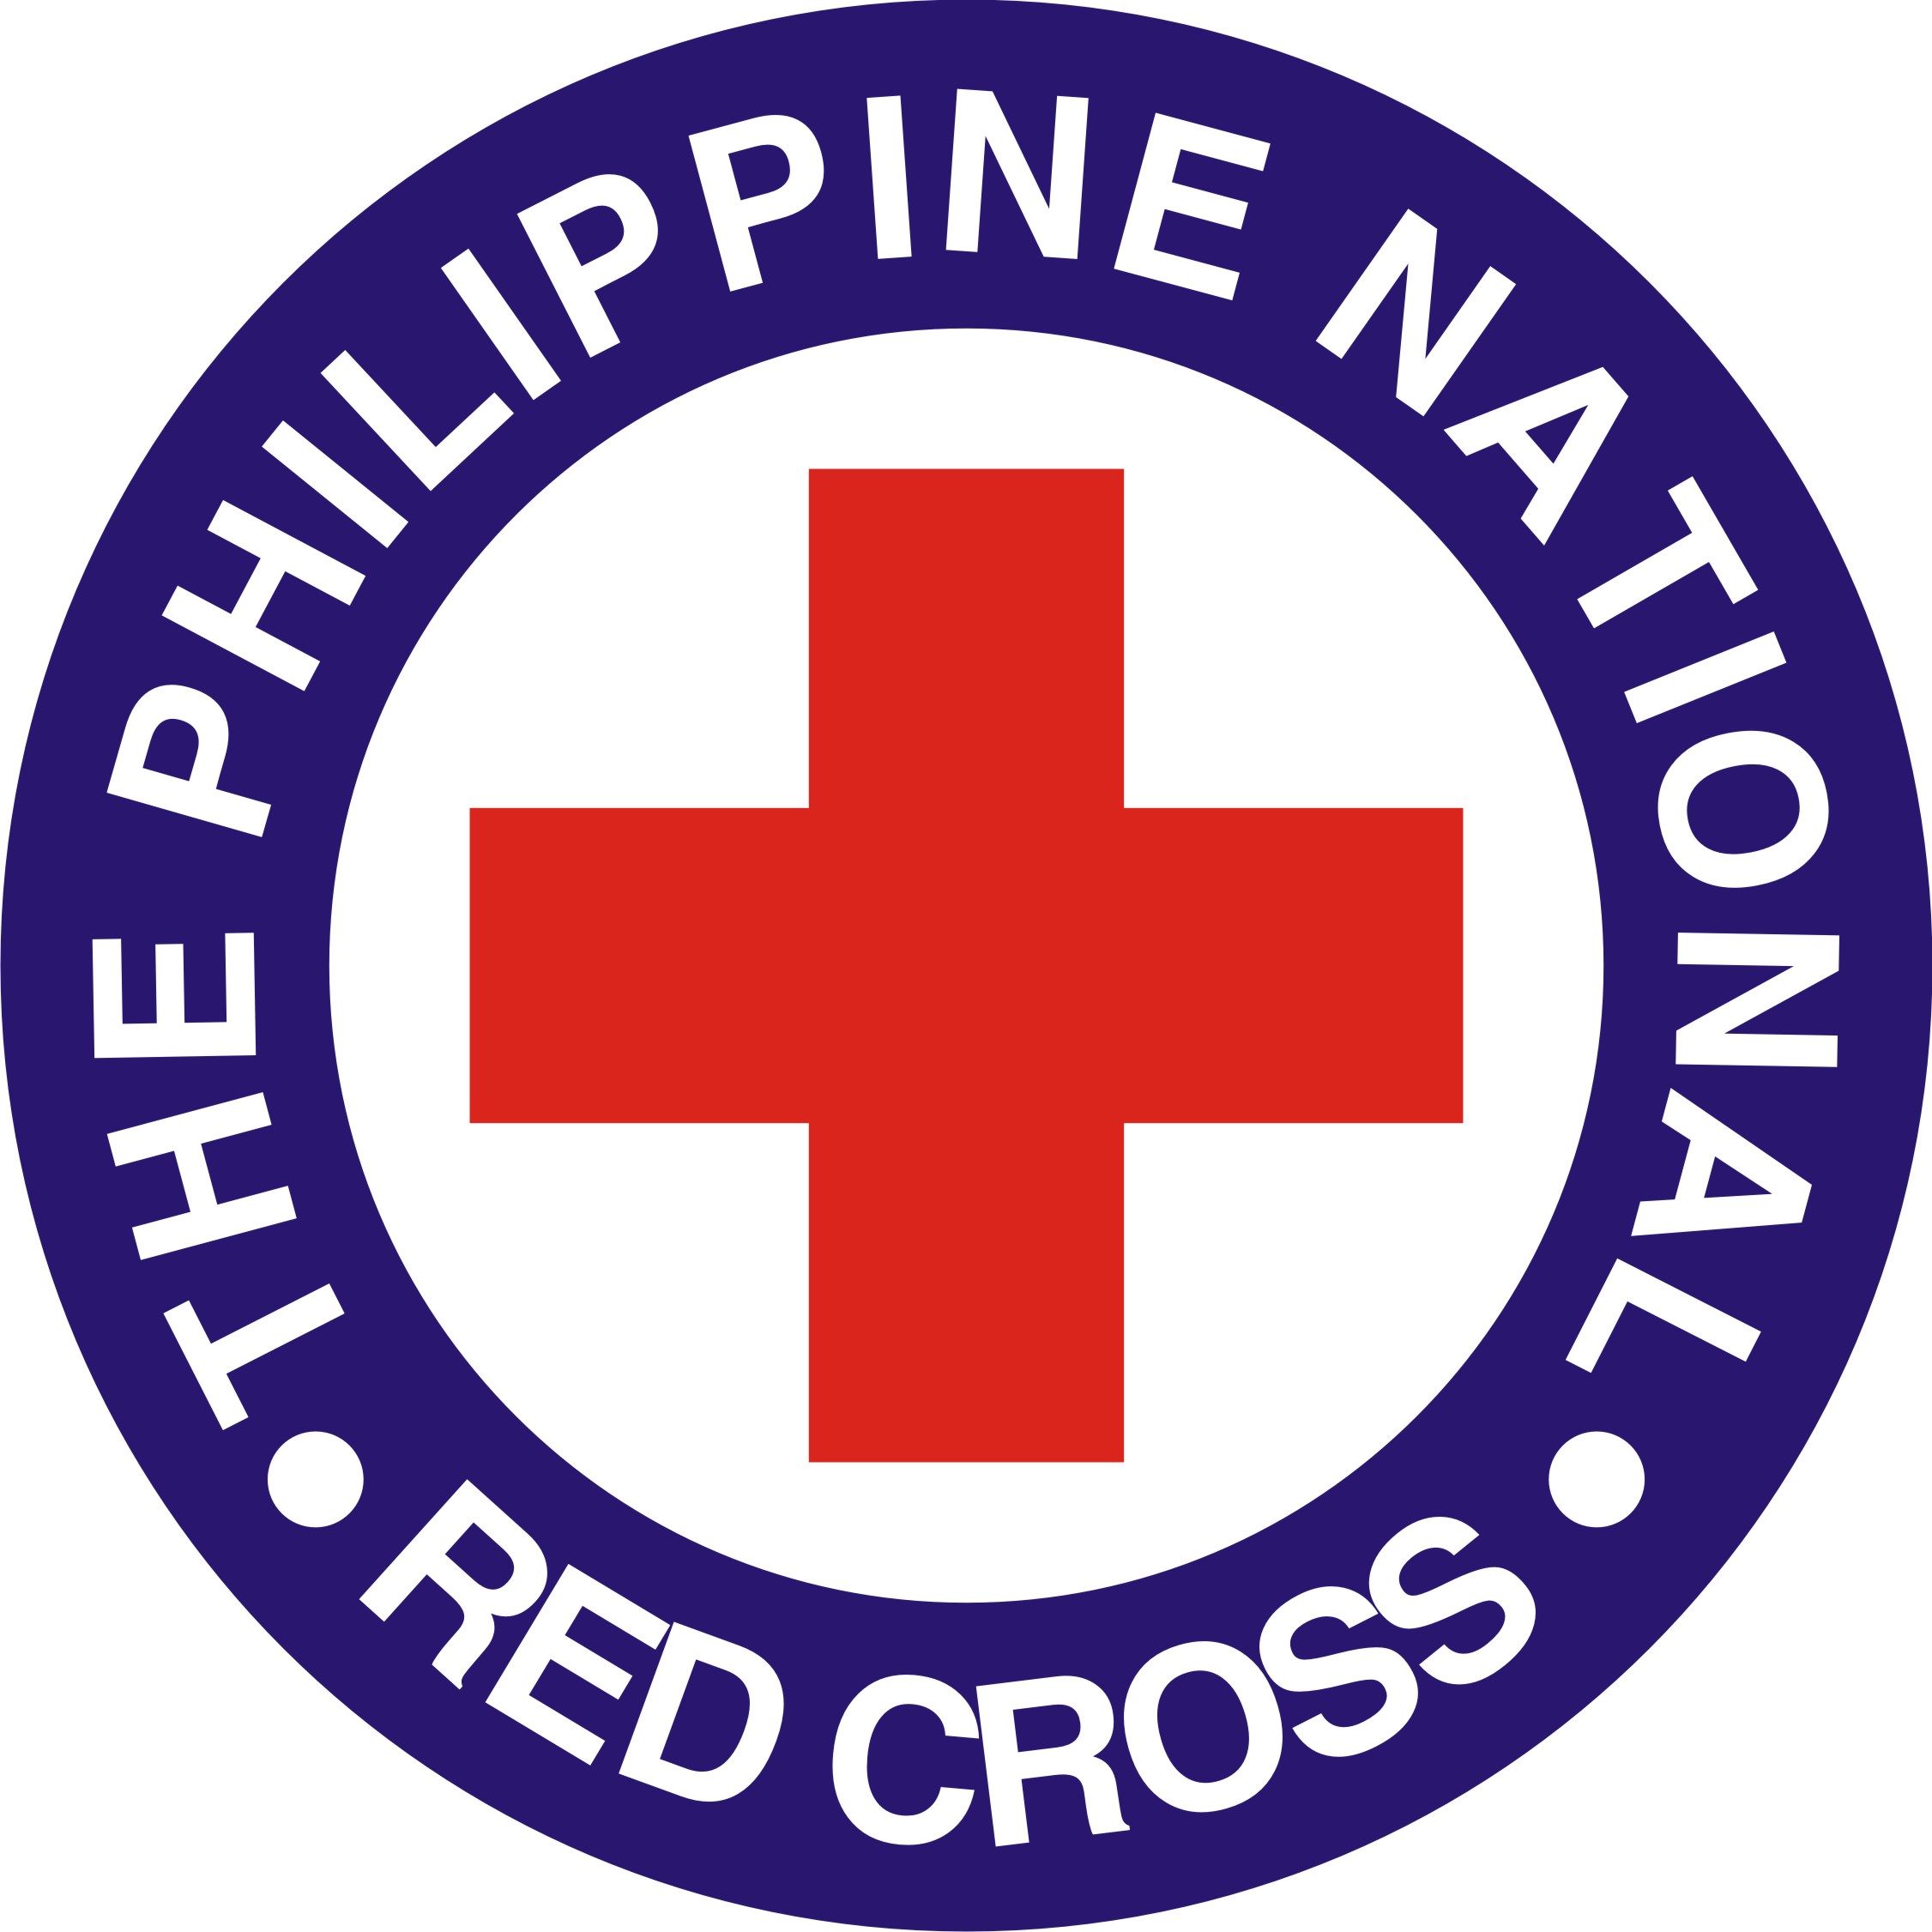 Philippine National Red Cross logo | Vectors and Stuffs